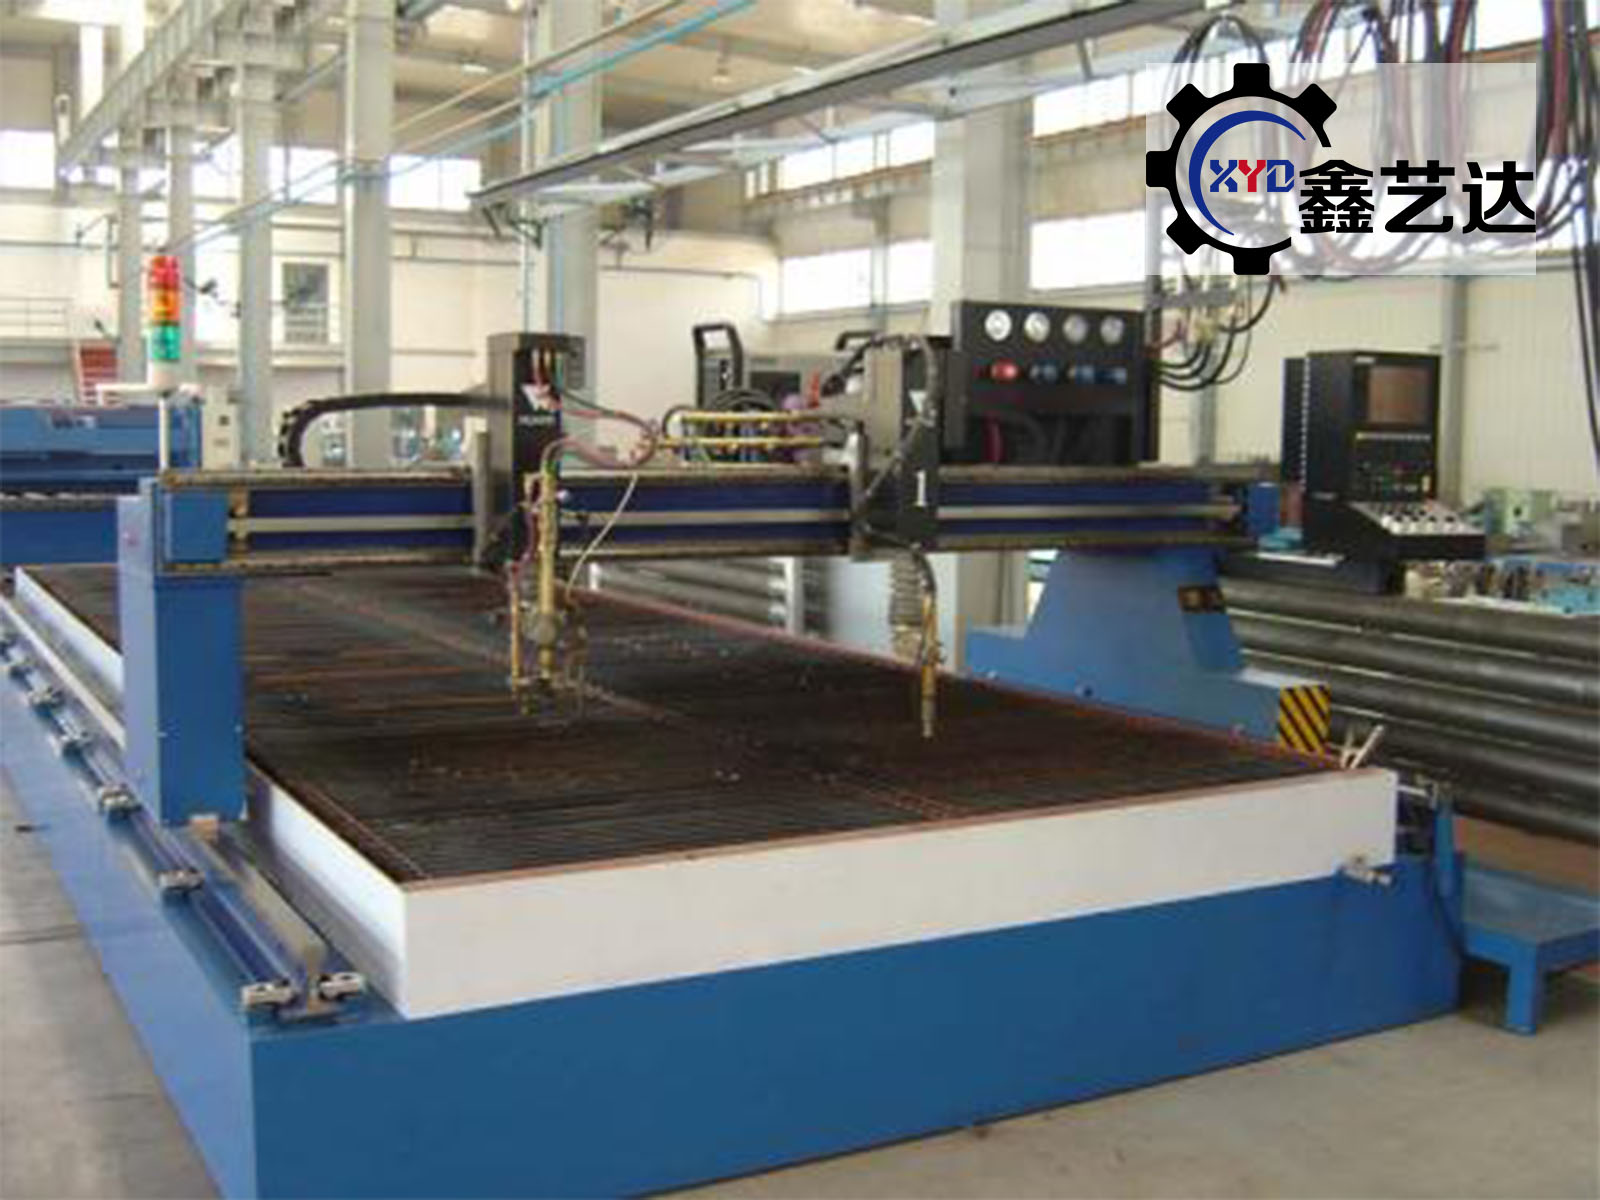 CNC flame cutting machine safety operation procedures